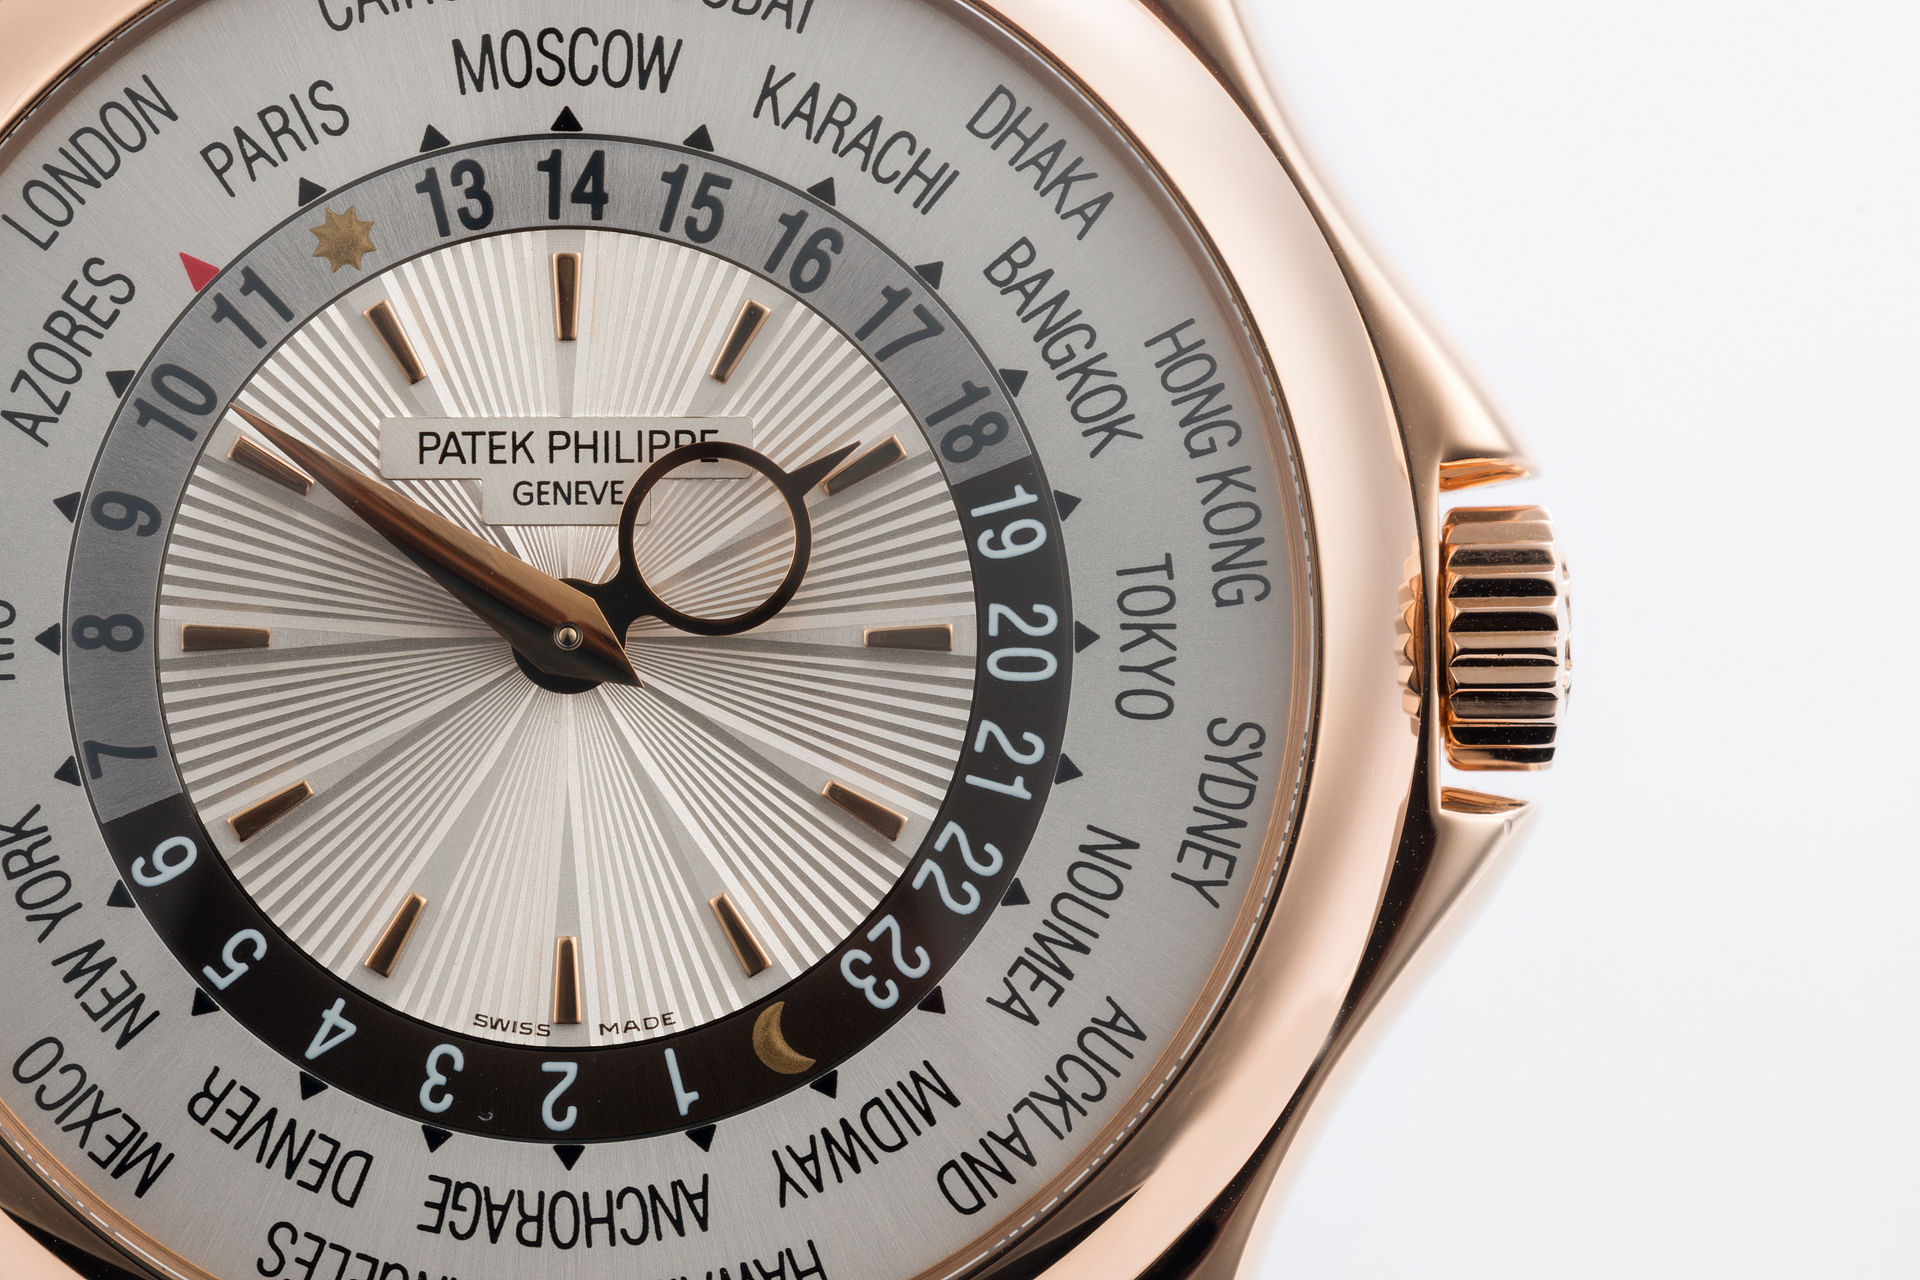 ref 5130R-001 | Complete With Box & Papers | Patek Philippe World Time